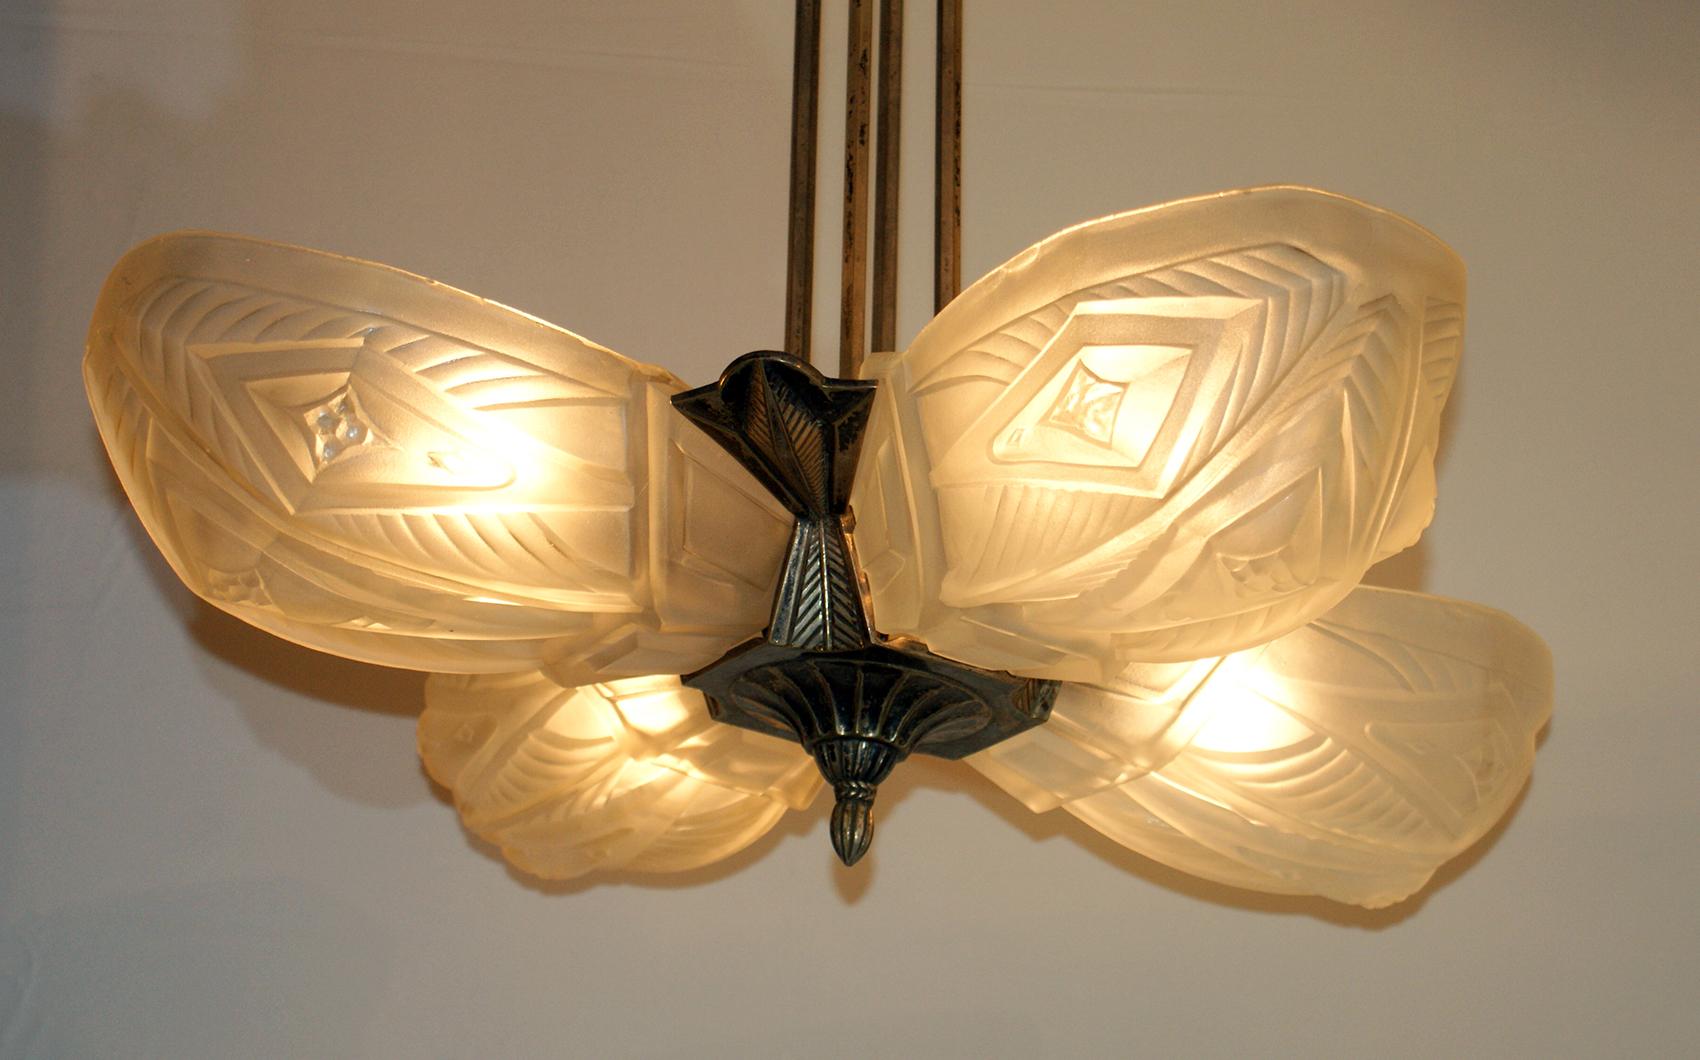 A stunning Art Deco Chandelier crafted in France and signed Francis Hubens.
This chandelier features four frosted glass panels with ornate detail work, held by a matching nickeled bronze hardware.
Having four candelabra sockets for the glass